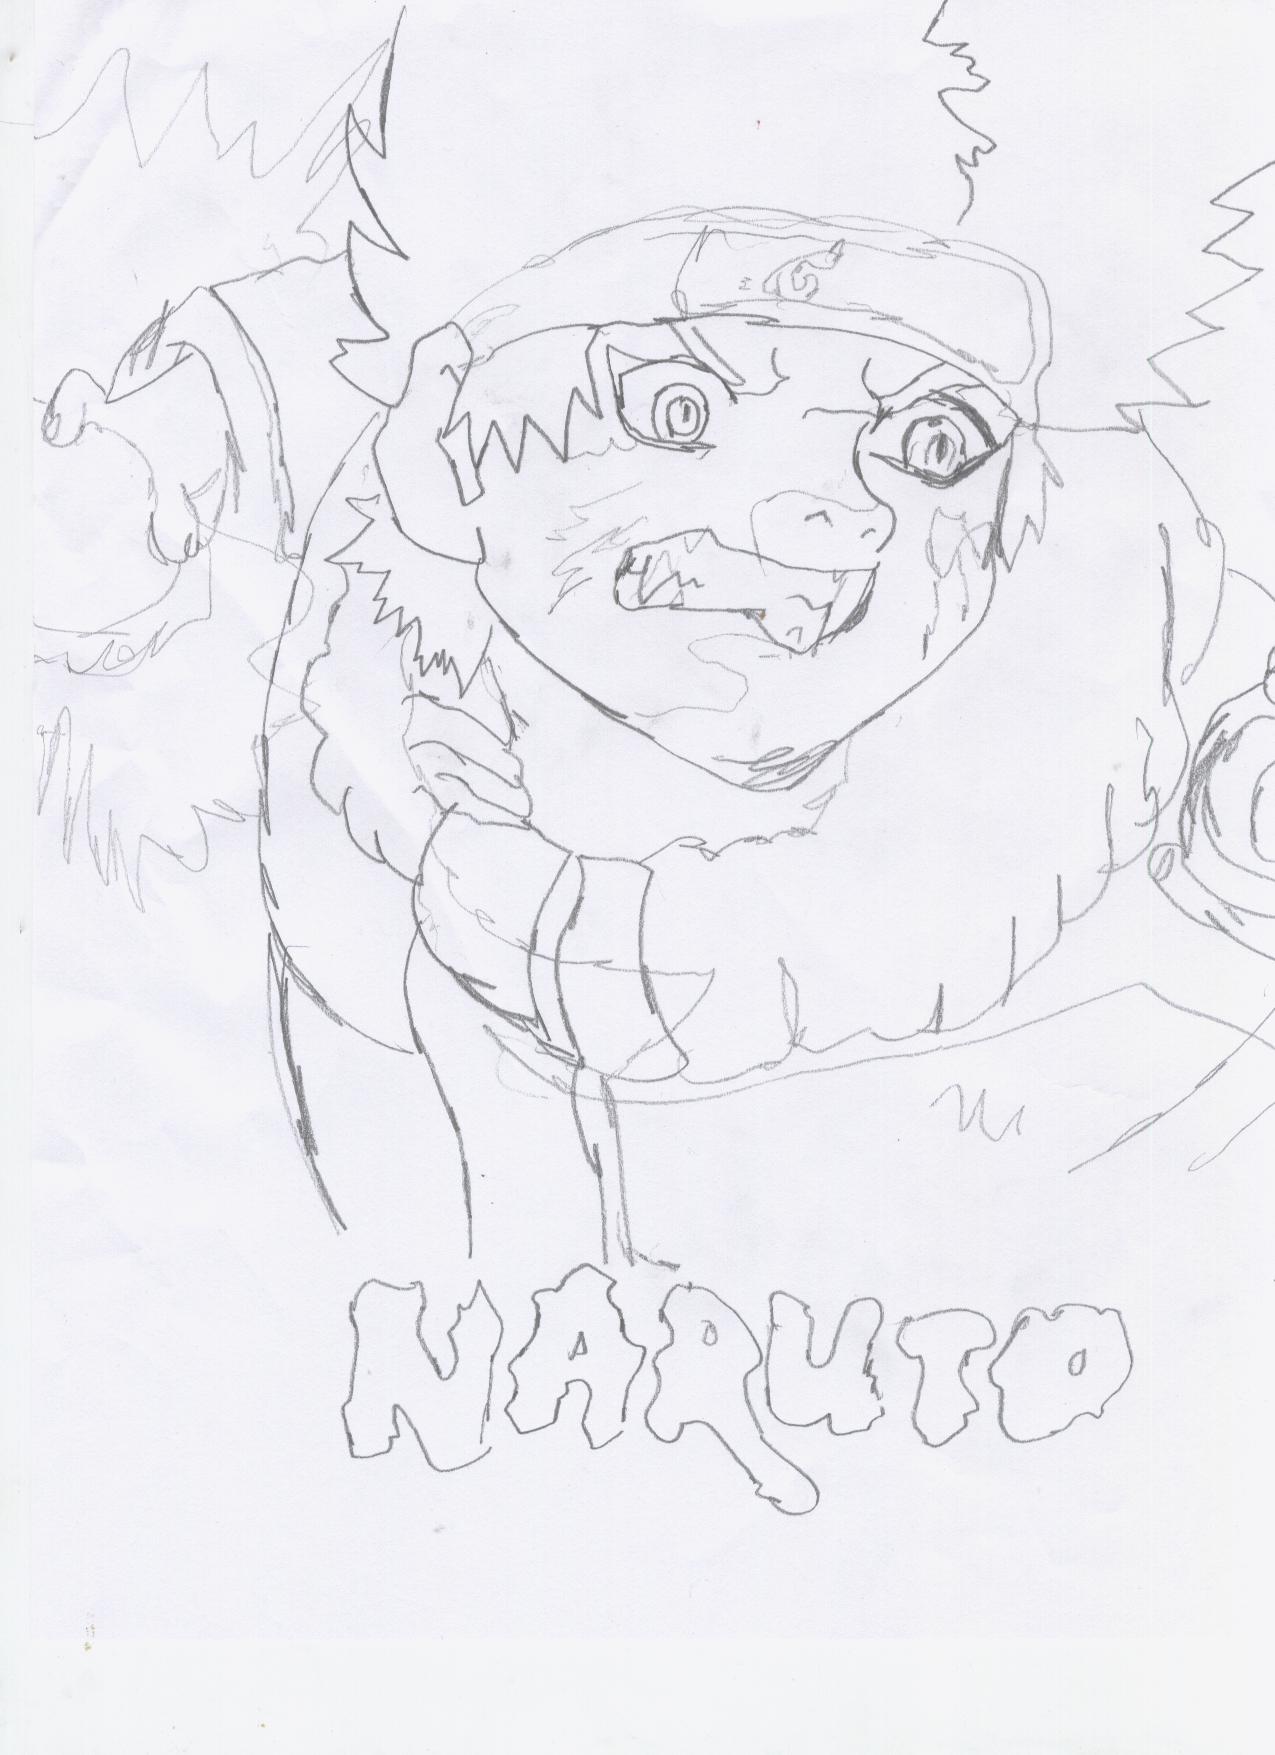 for 9tailednaruto's contest by don